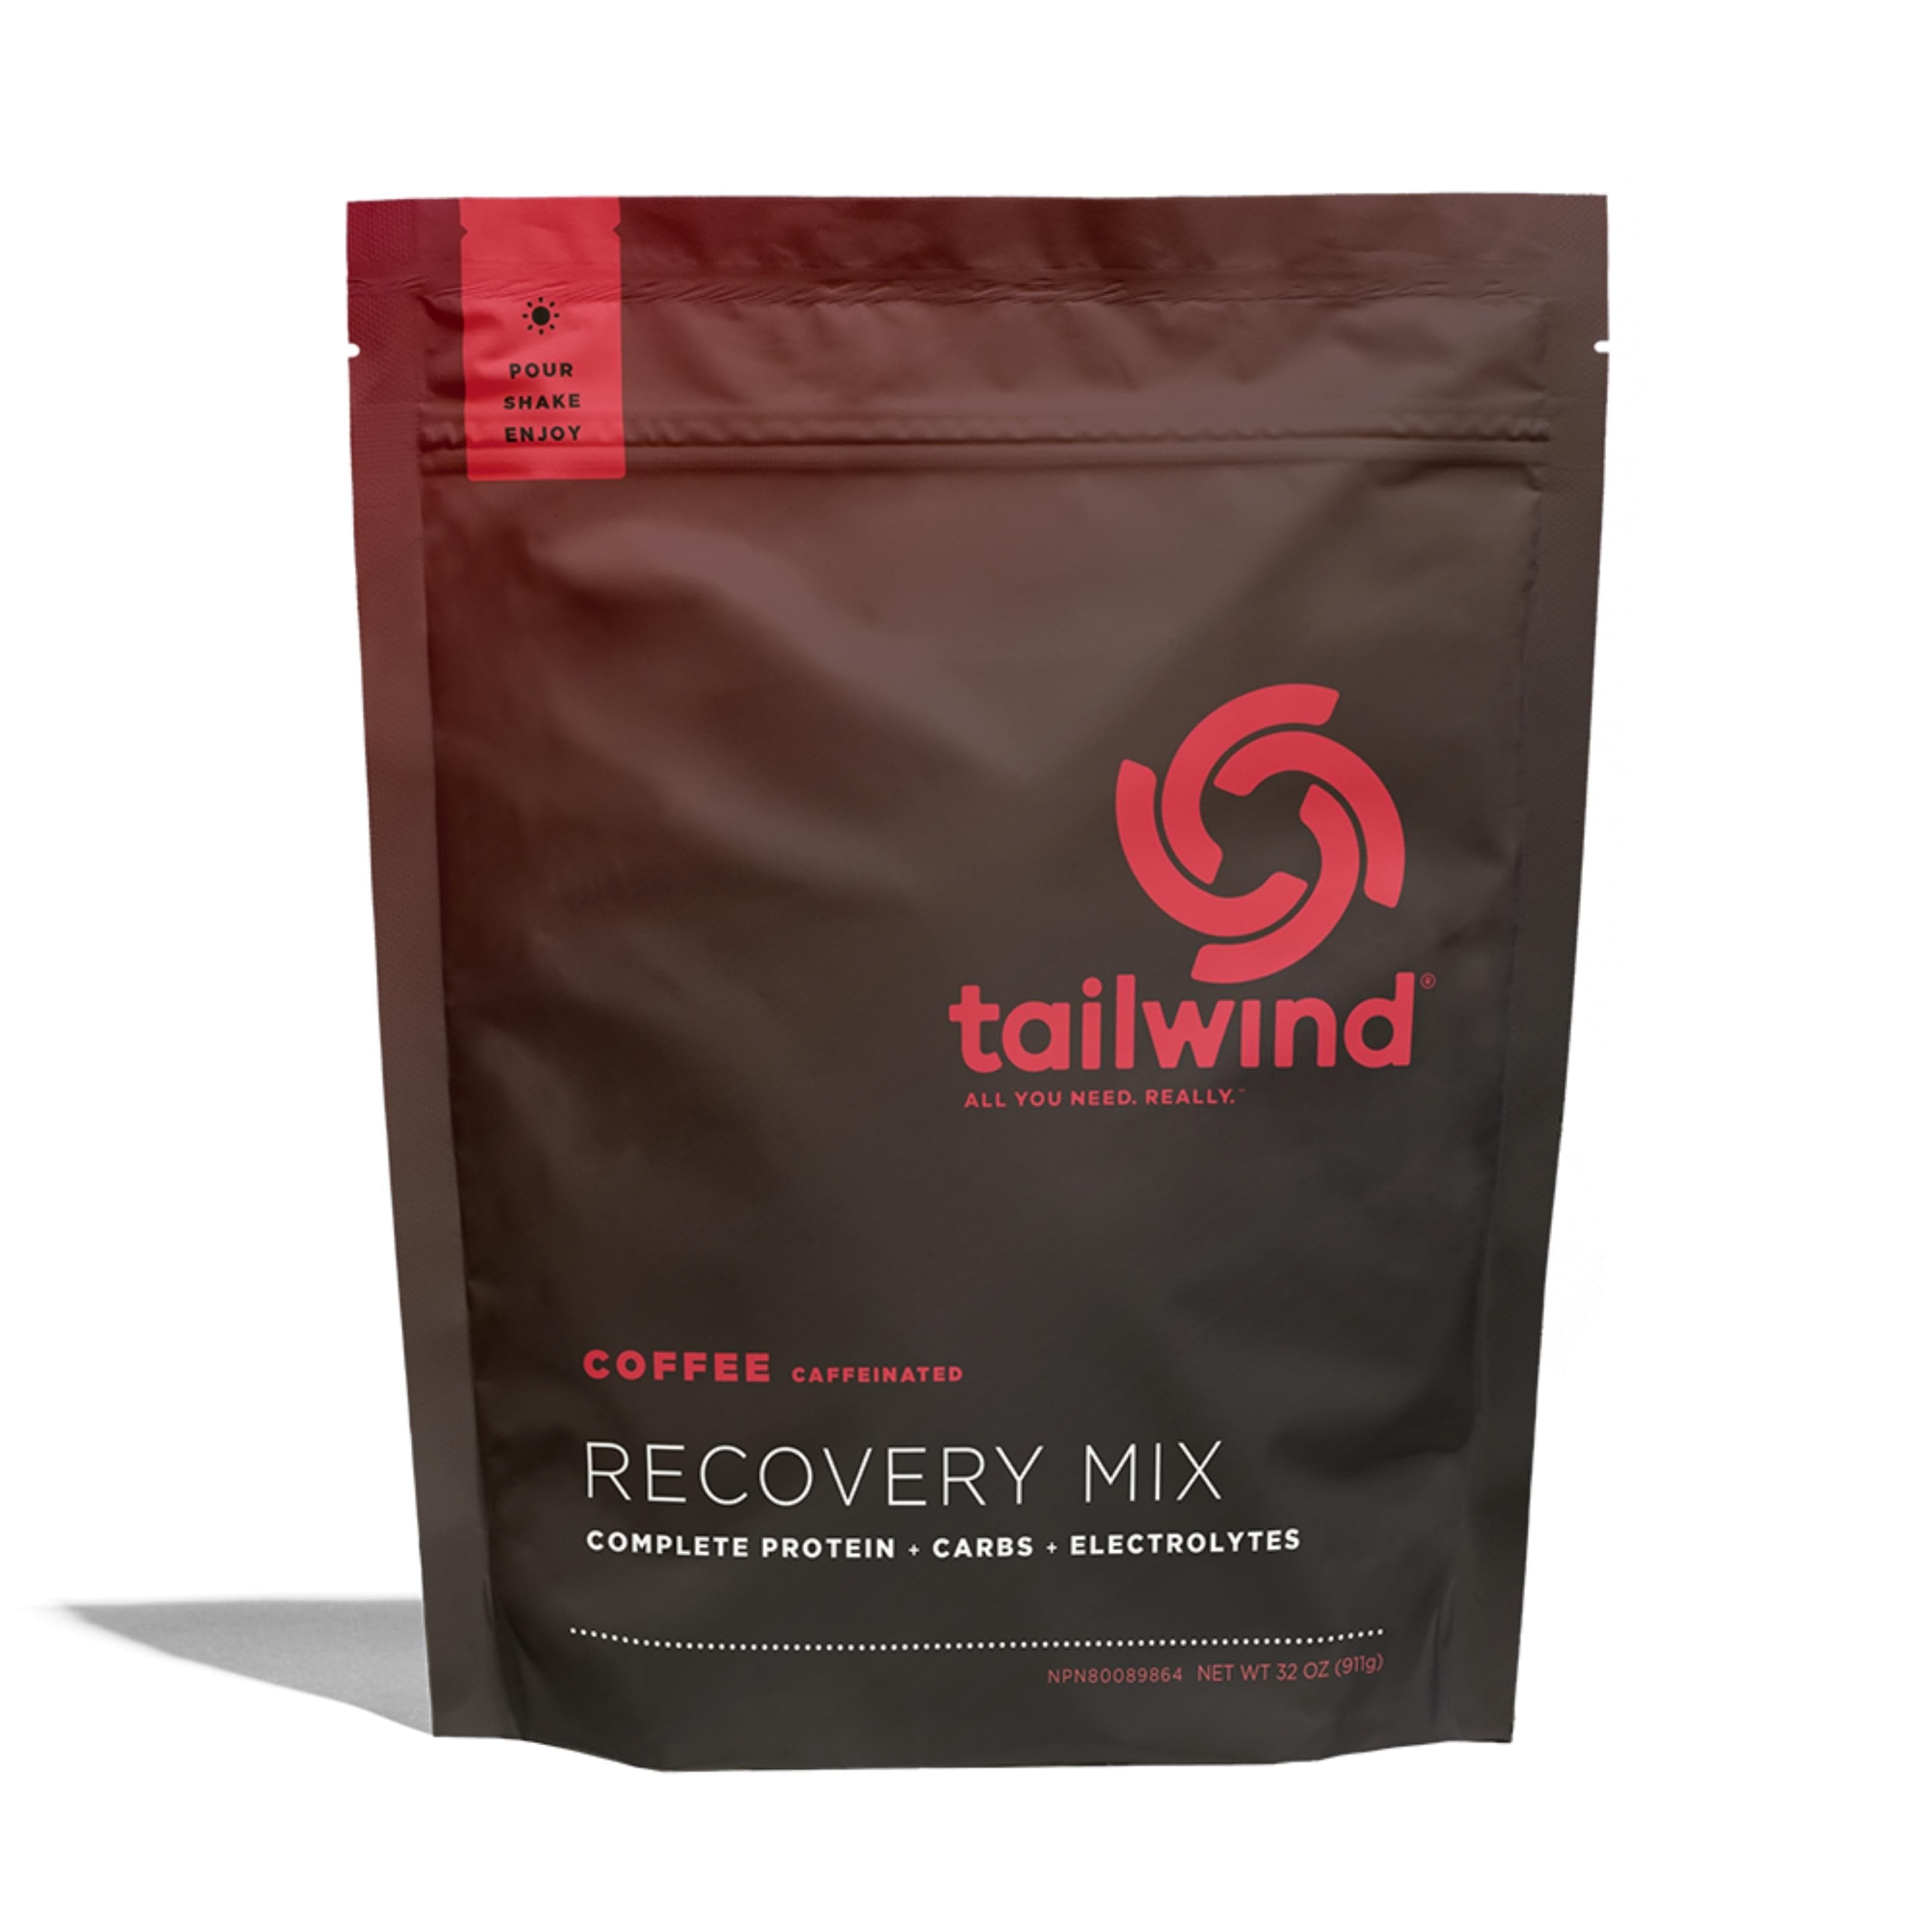 tailwind Nutrition Supplement Medium (30 serve) / Coffee Rebuild Recovery Drink Mix 8 55283 00580 4